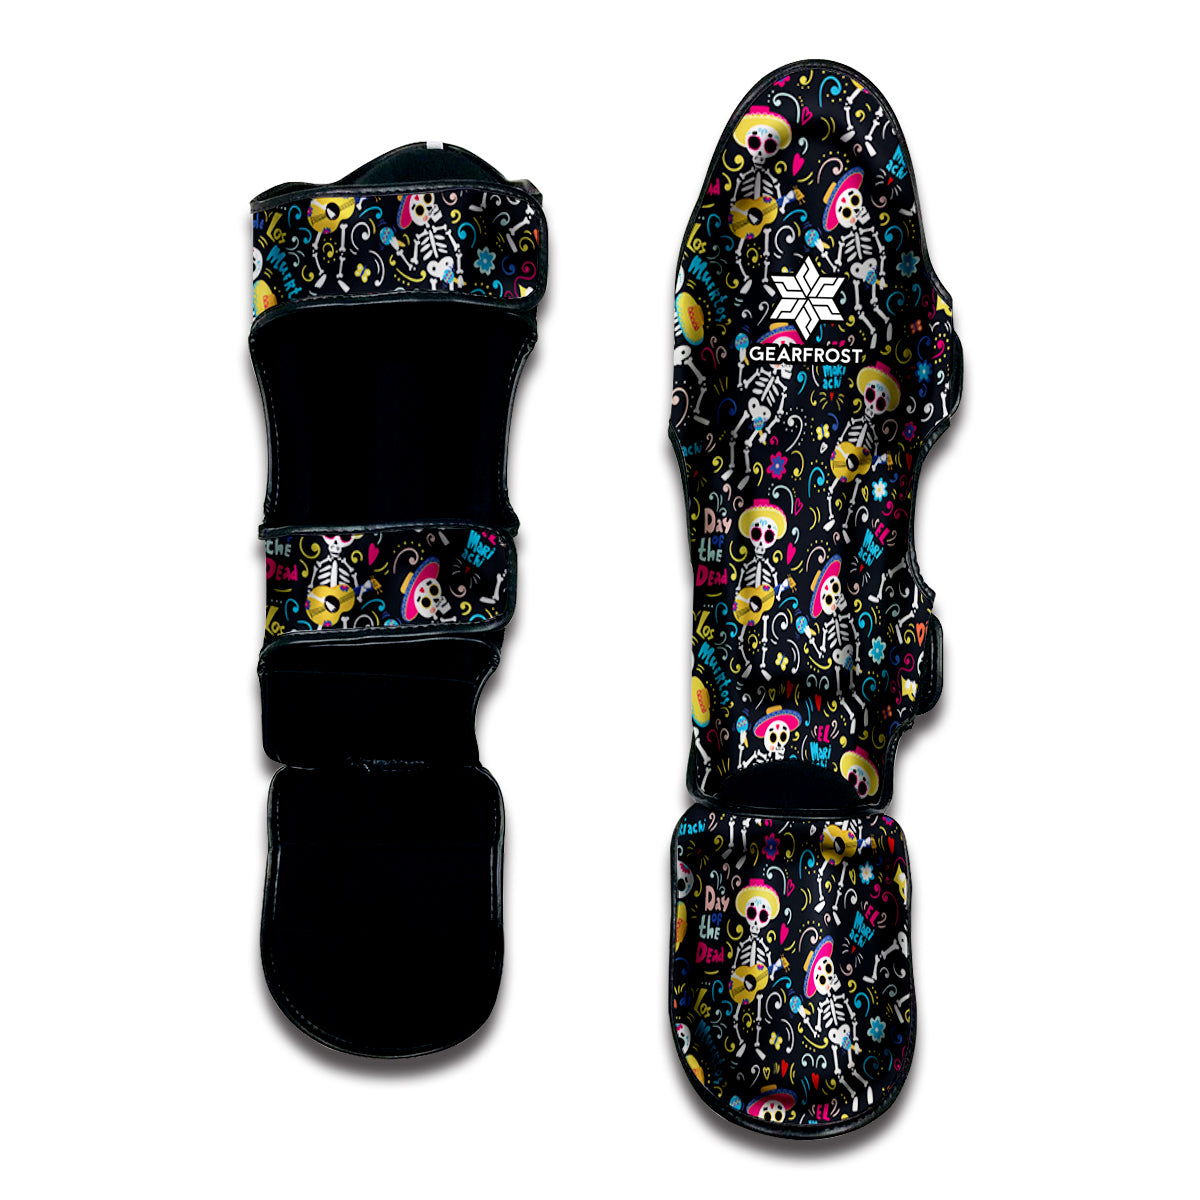 Day Of The Dead Mariachi Skeletons Print Muay Thai Shin Guard